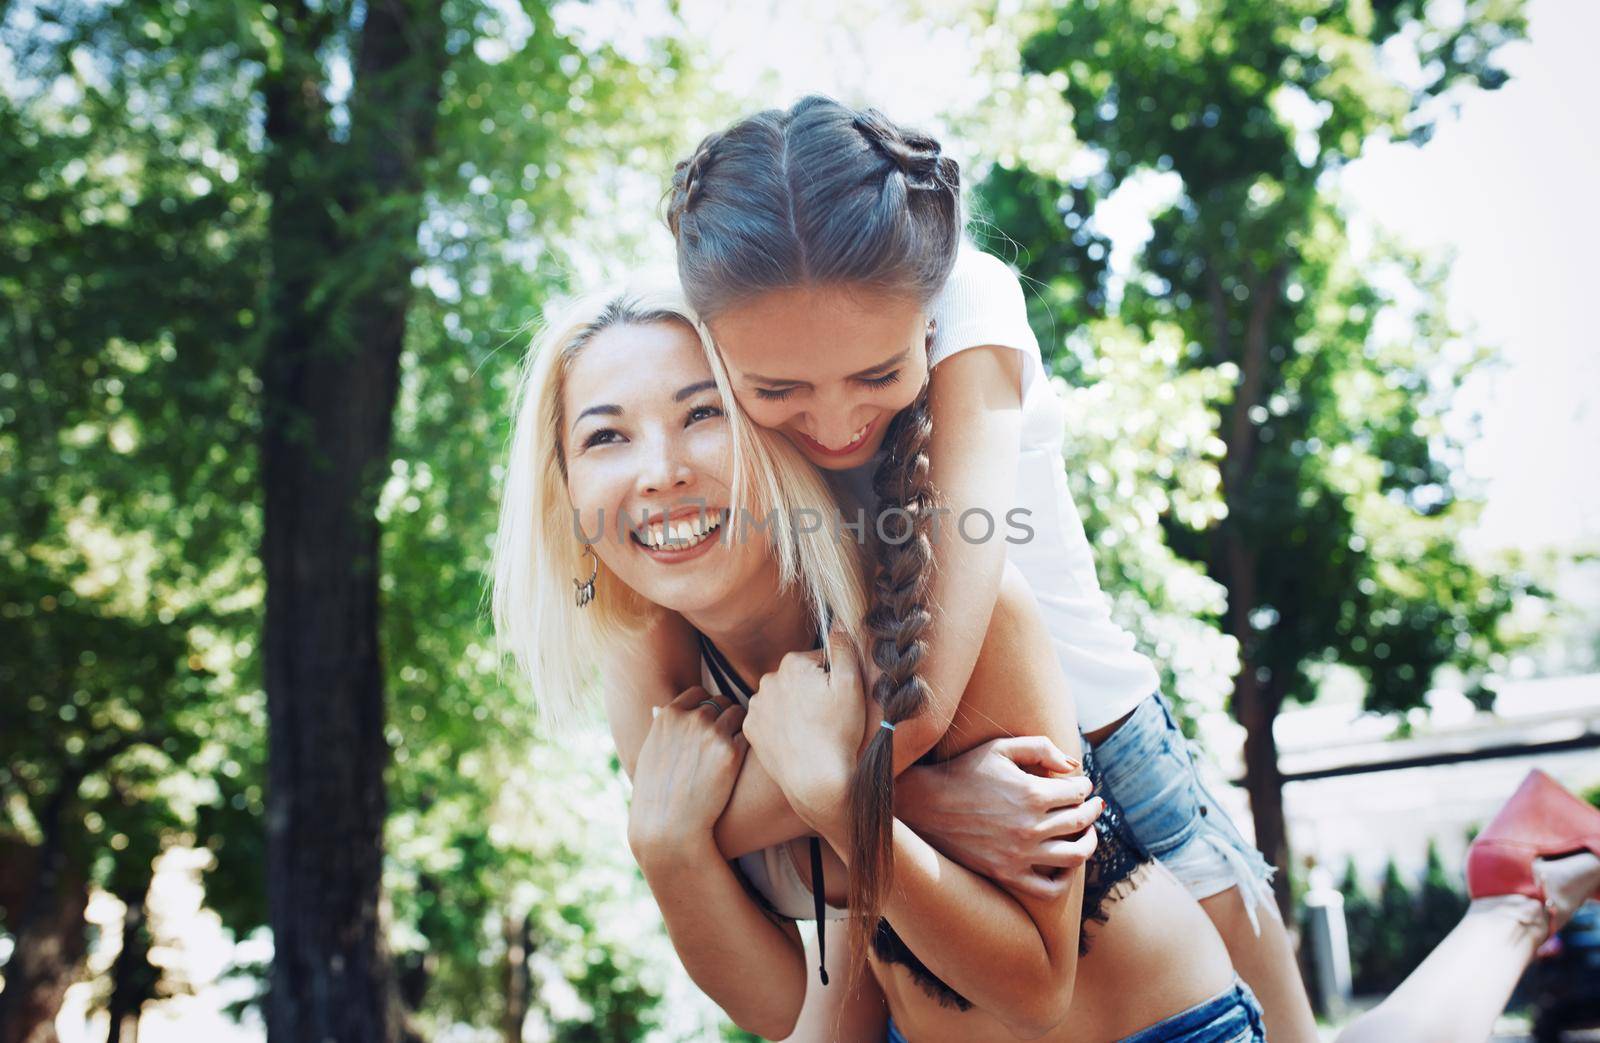 Young woman riding piggyback on friend by Novic